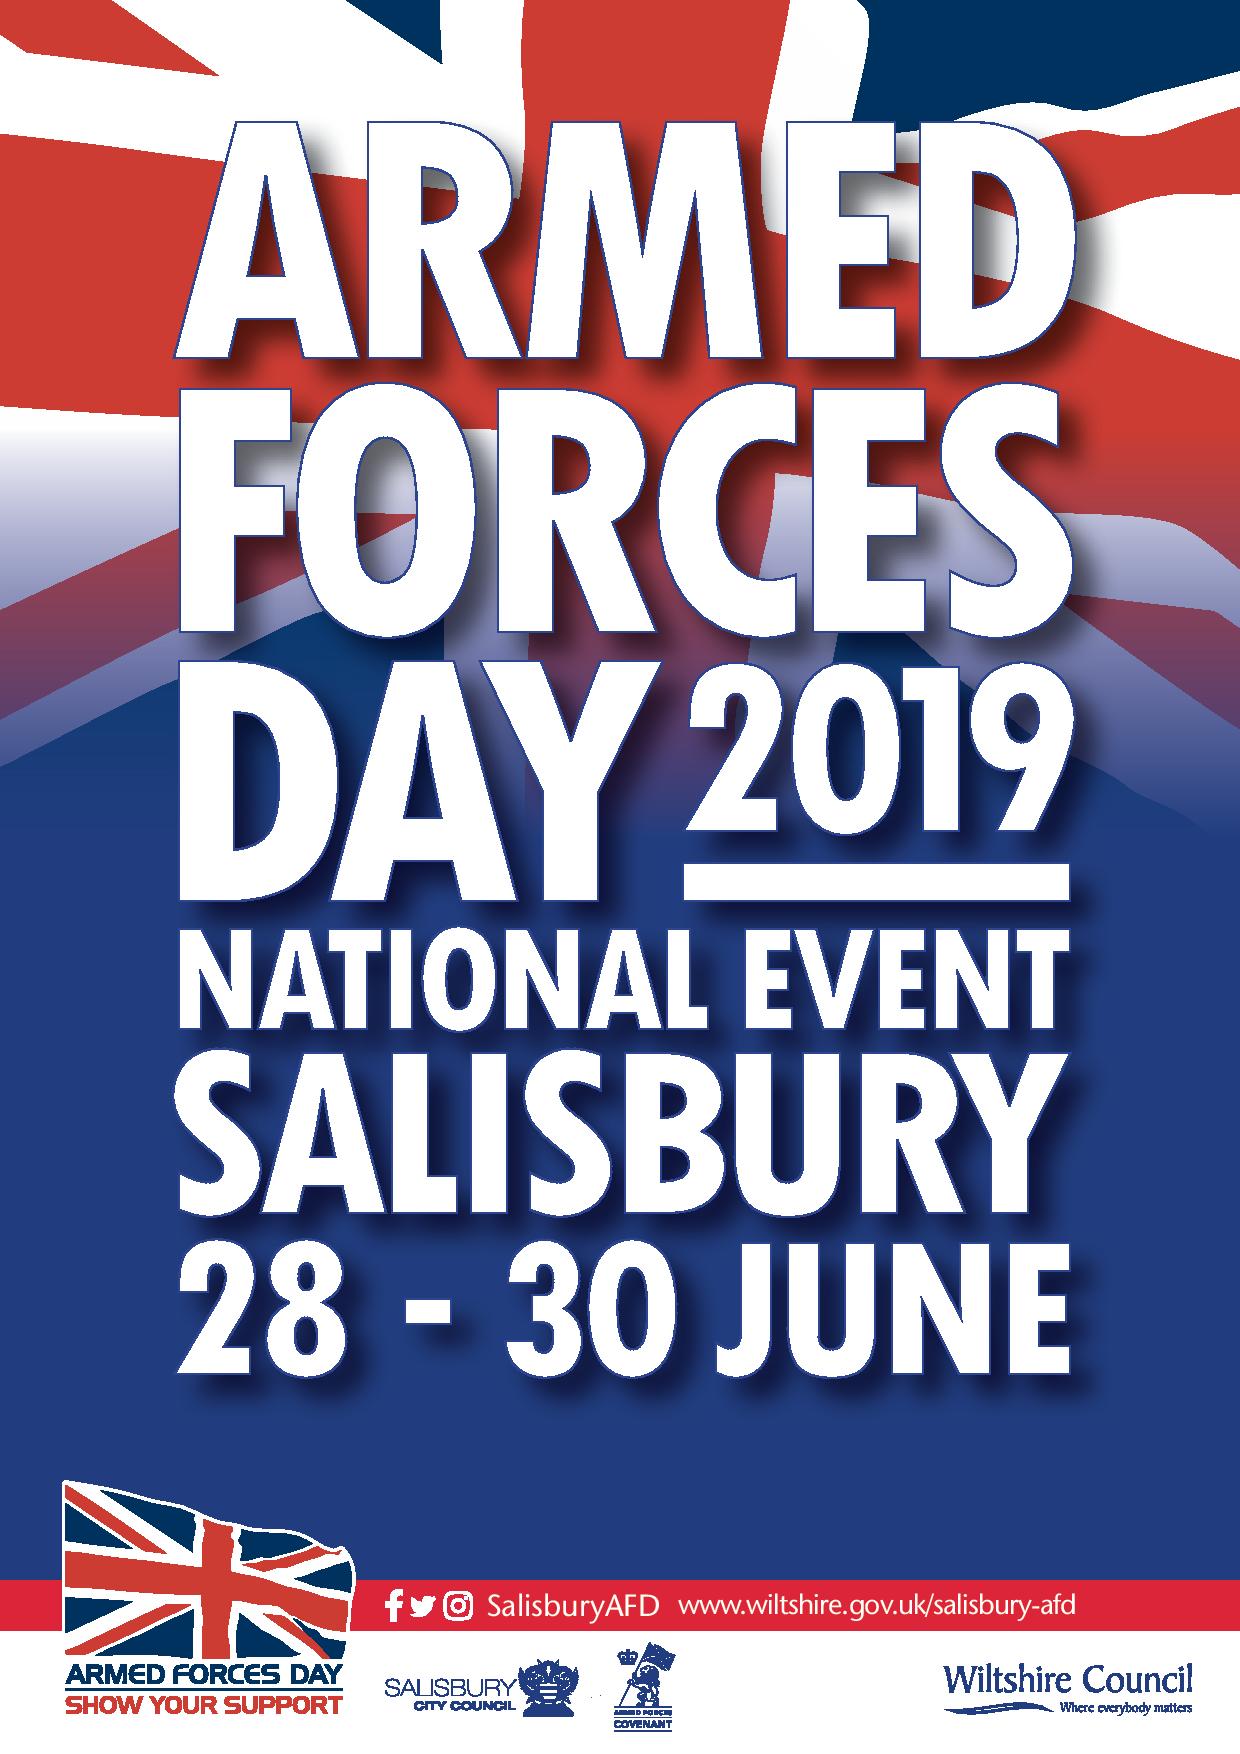 Pathfinder Announced As Media Partner For Armed Forces Day National Event